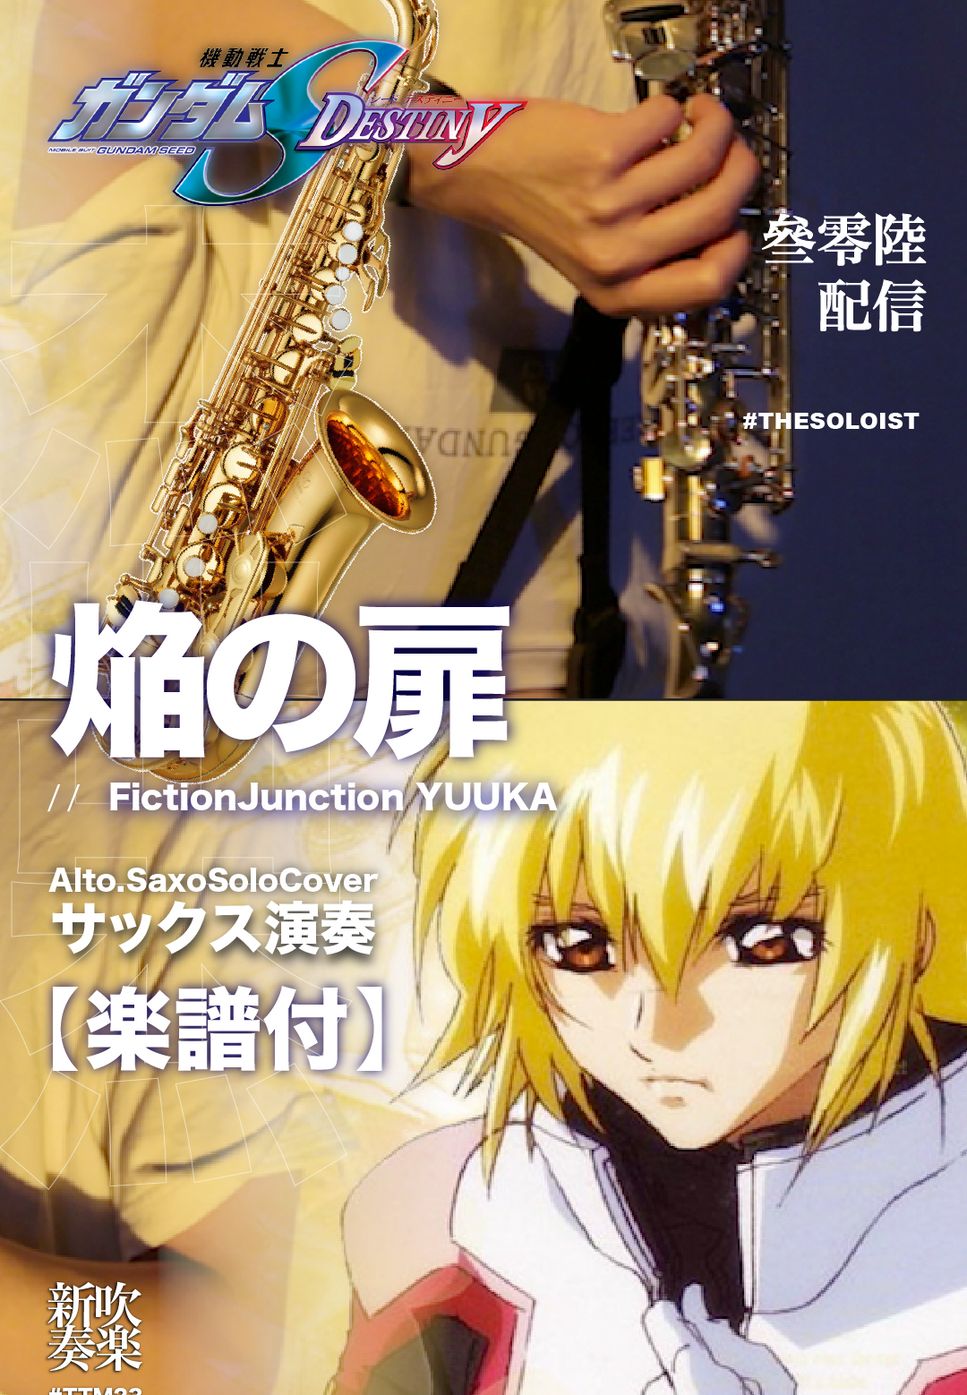 FictionJunction YUUKA - The Gate of Flames (C/ Bb/ F/ Eb Solo Sheet Music) by Kit